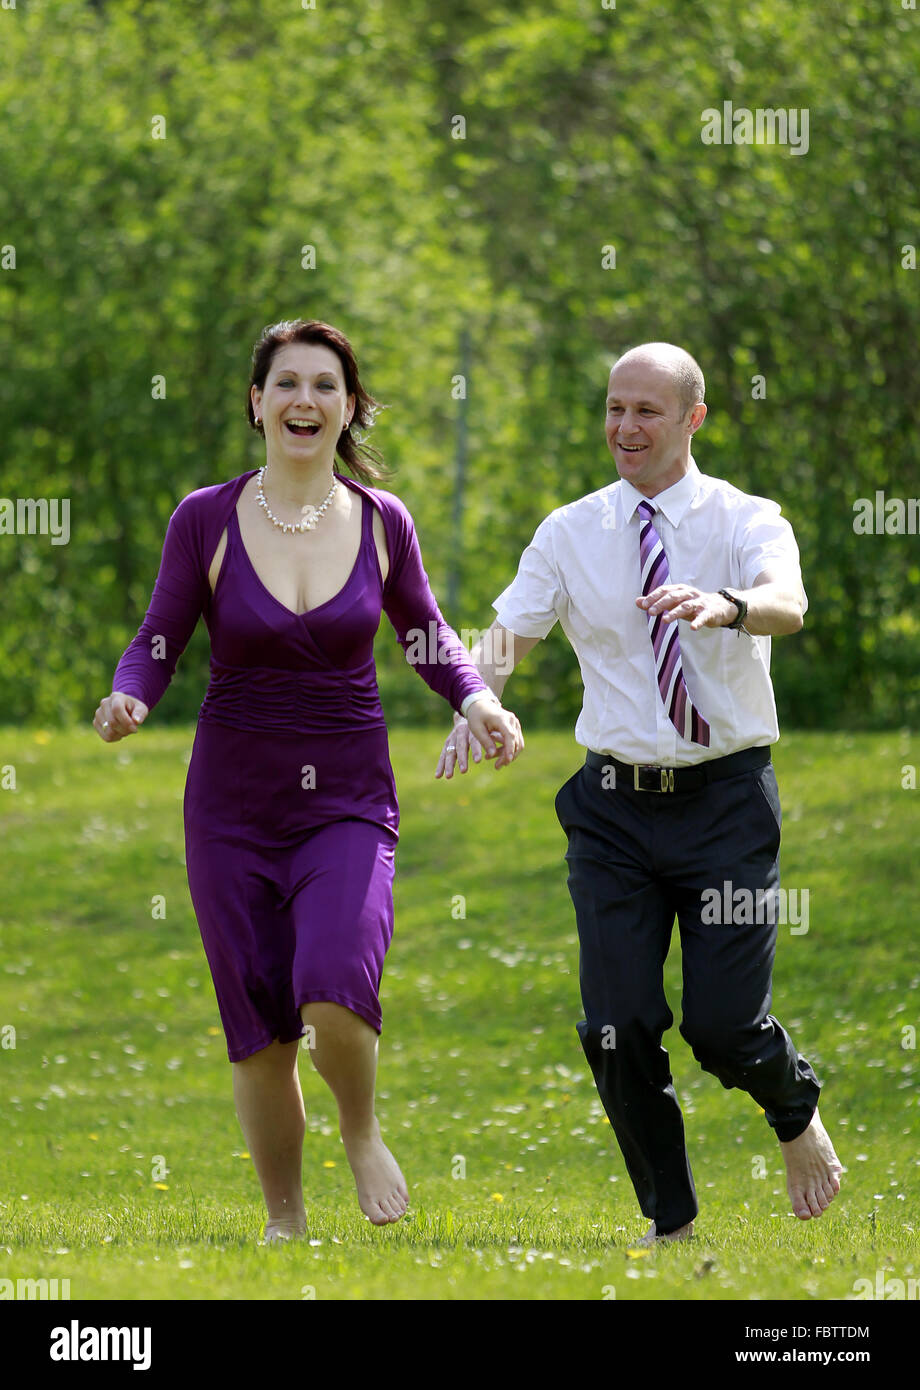 a man and a woman running in a meadow Stock Photo